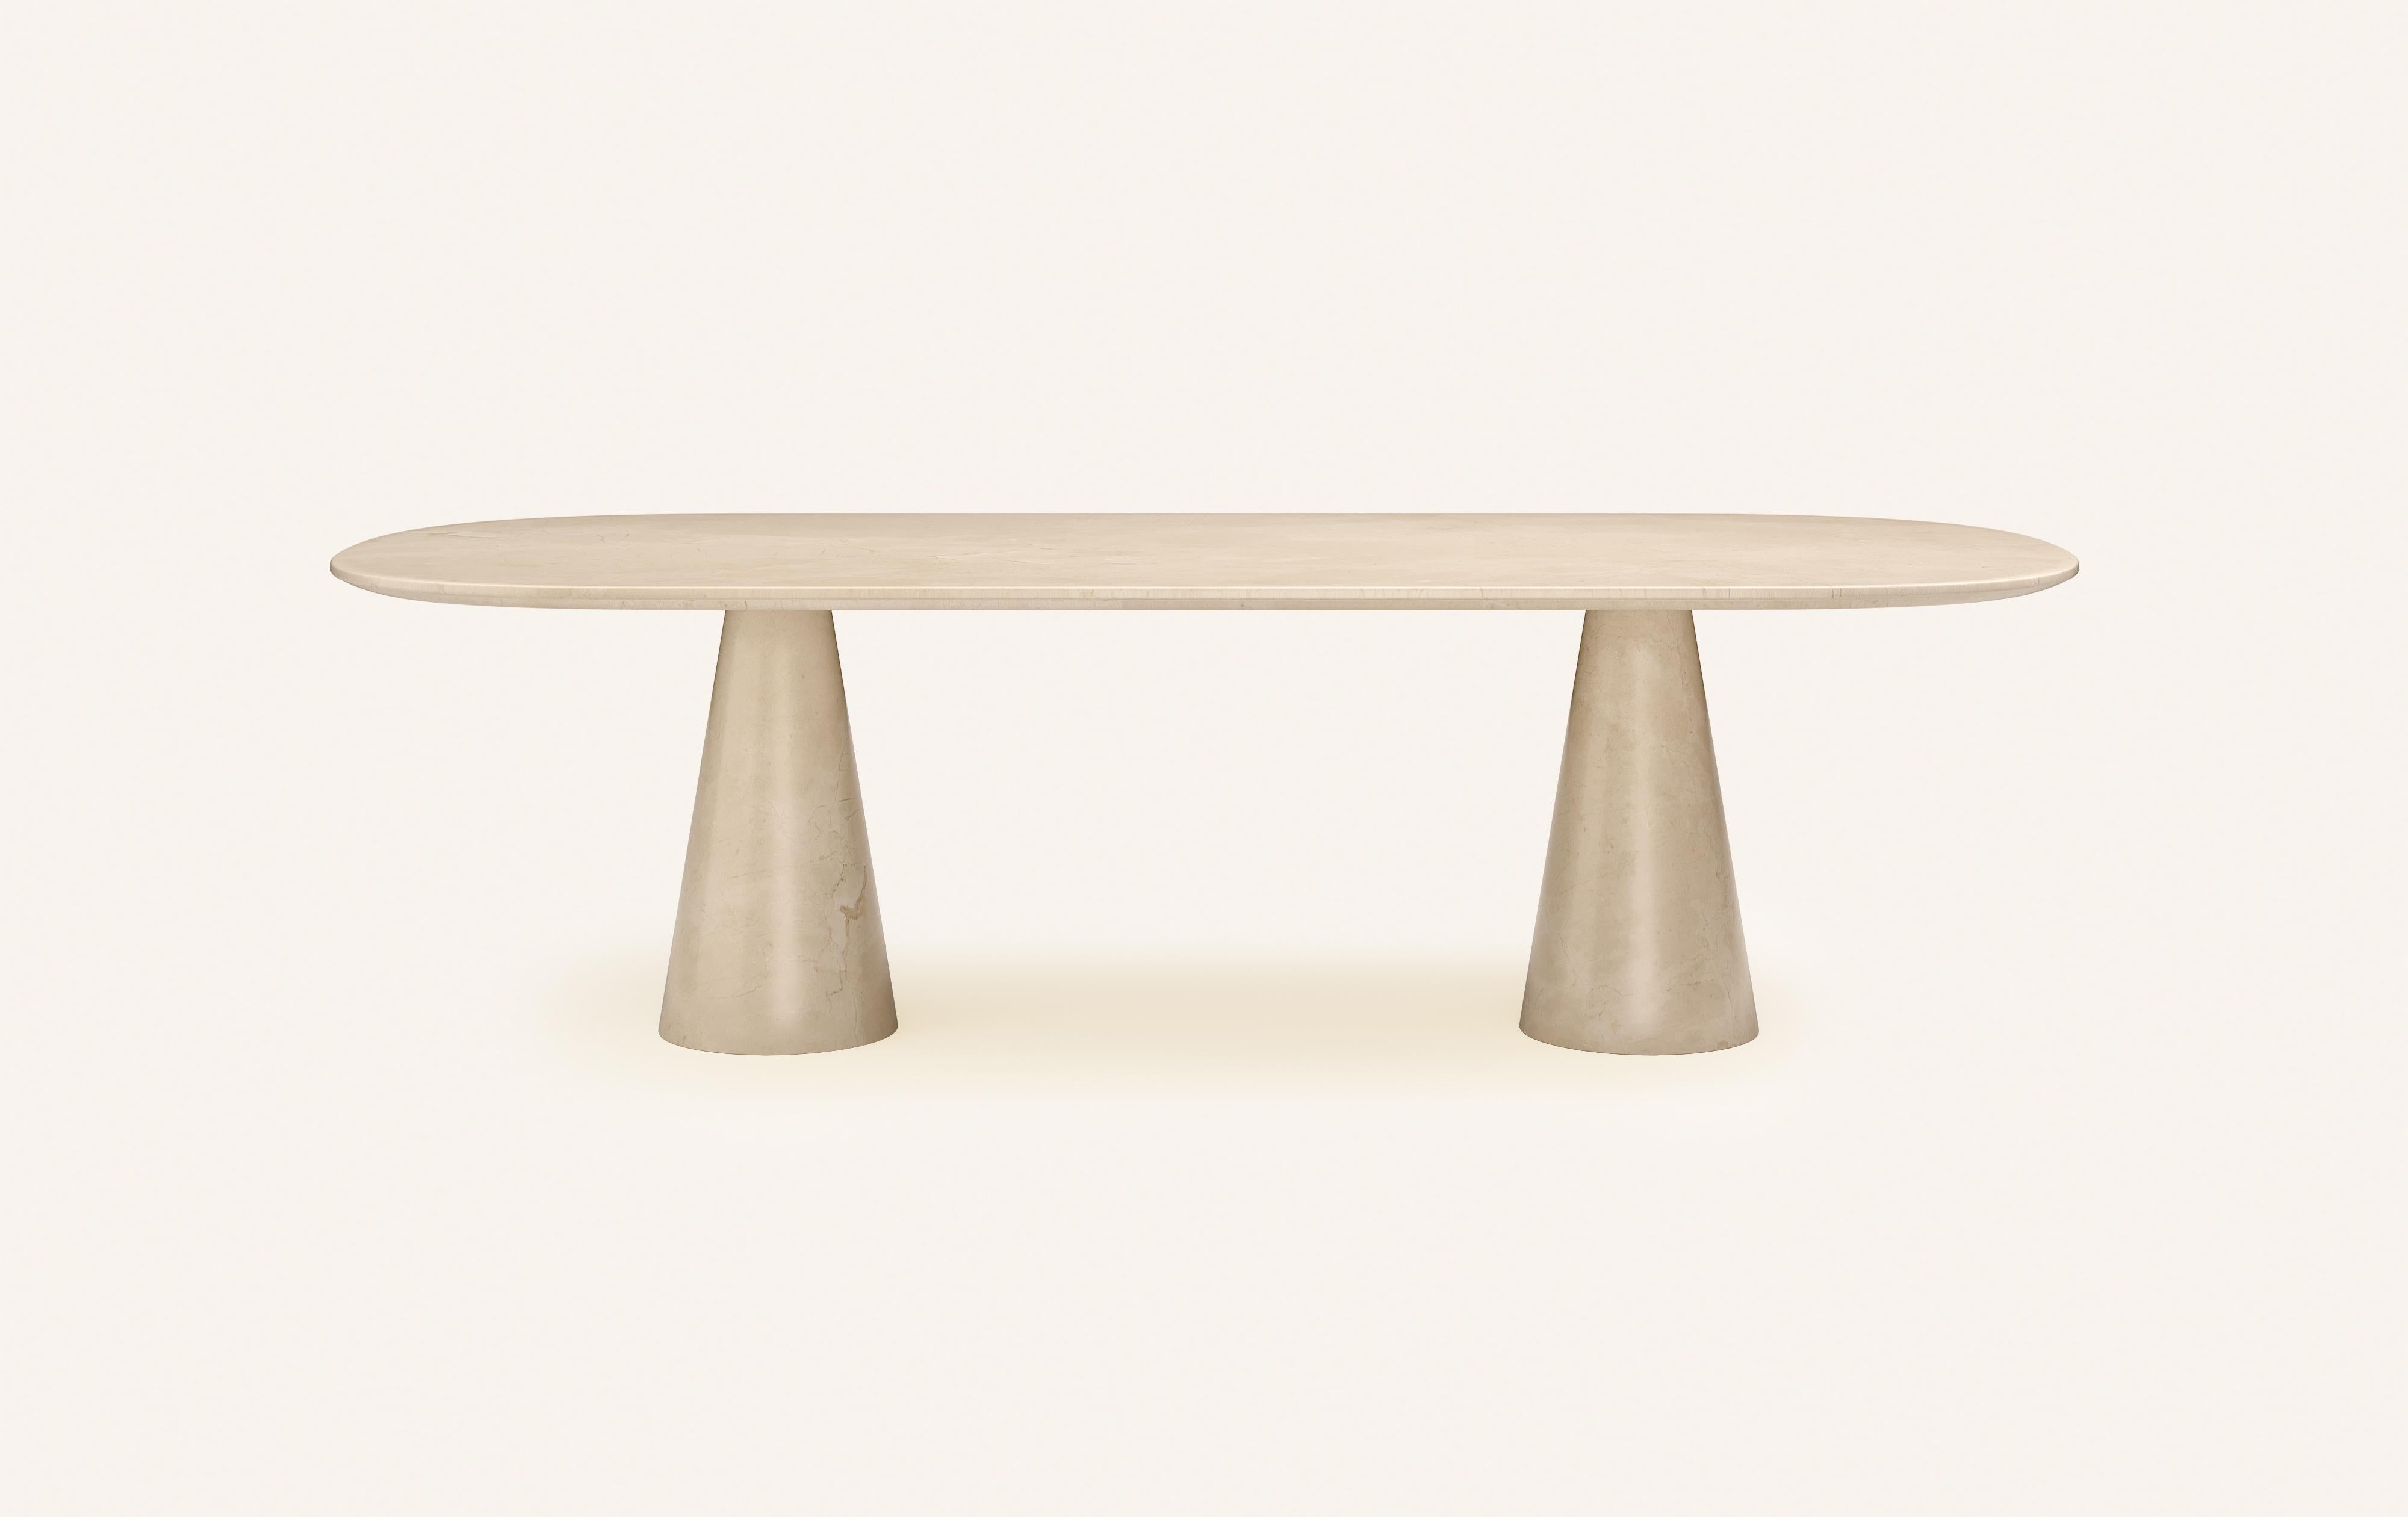 SIMPLISTIC YET MUSCULAR FORMS INFLUENCED BY POST MODERN ITALIAN DESIGN.

DIMENSIONS: 
84”L x 42”W x 30”H: 
- 1.5